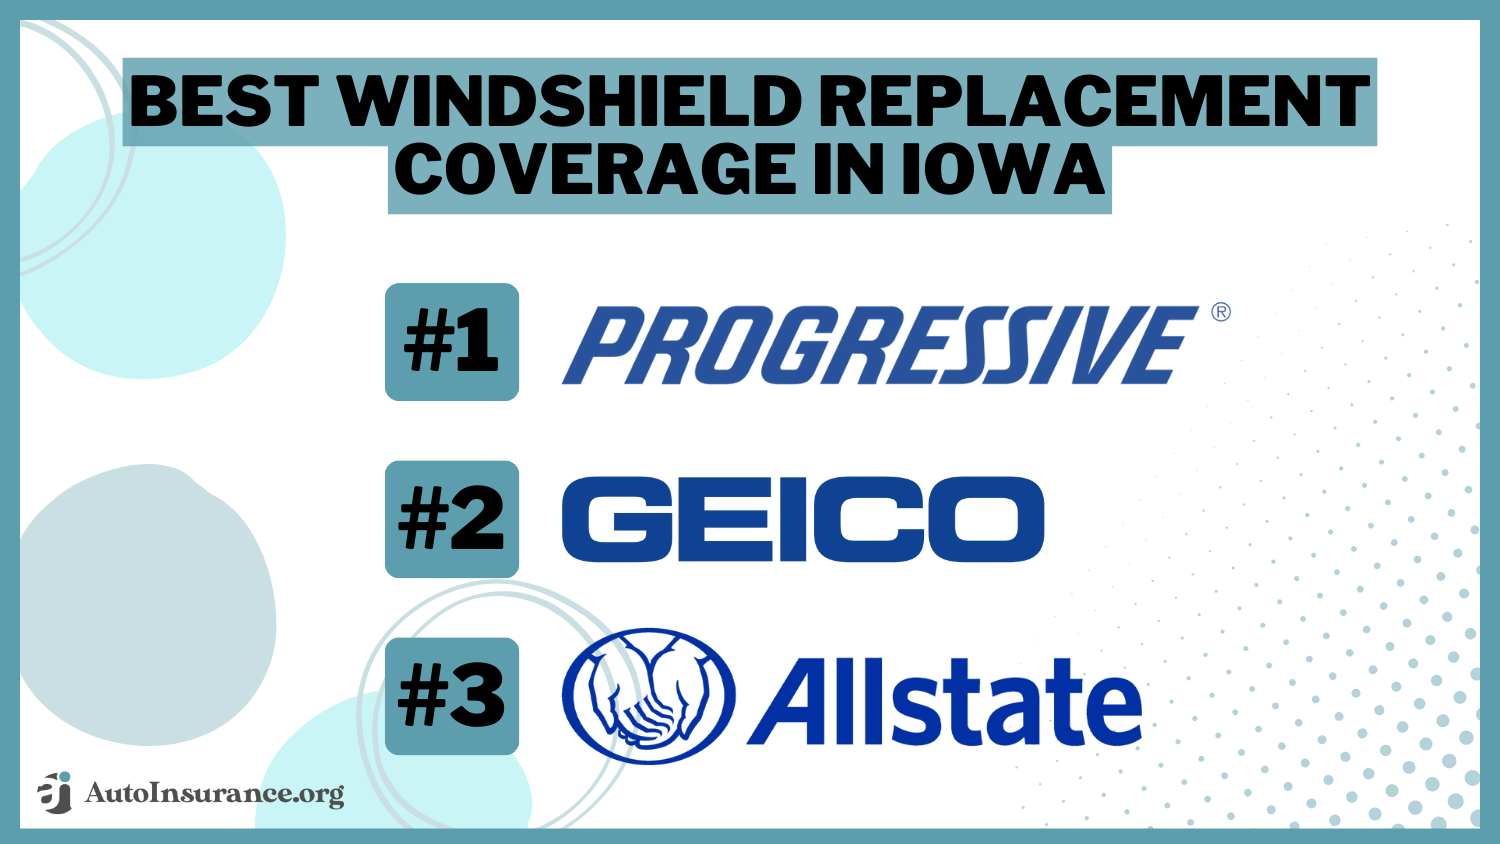 Best Windshield Replacement Coverage in Iowa: Progressive, Geico, and Allstate